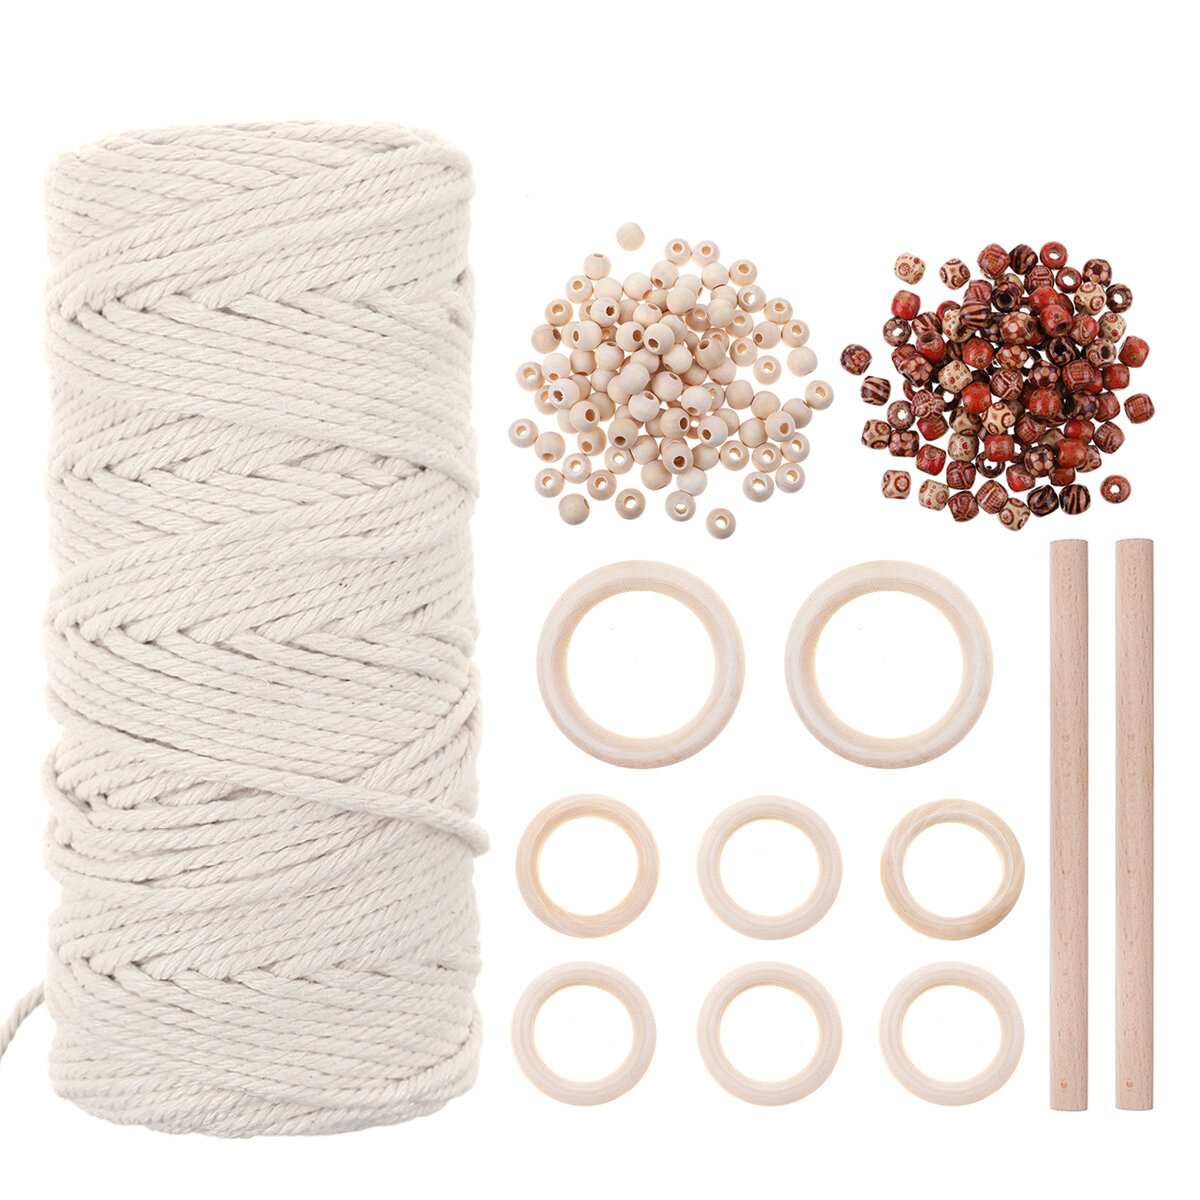 Natural Macrame Cord 3mm Cotton Cord with 8pcs Wood Ring and 2 Wooden Stick for DIY Craft Braided Wire